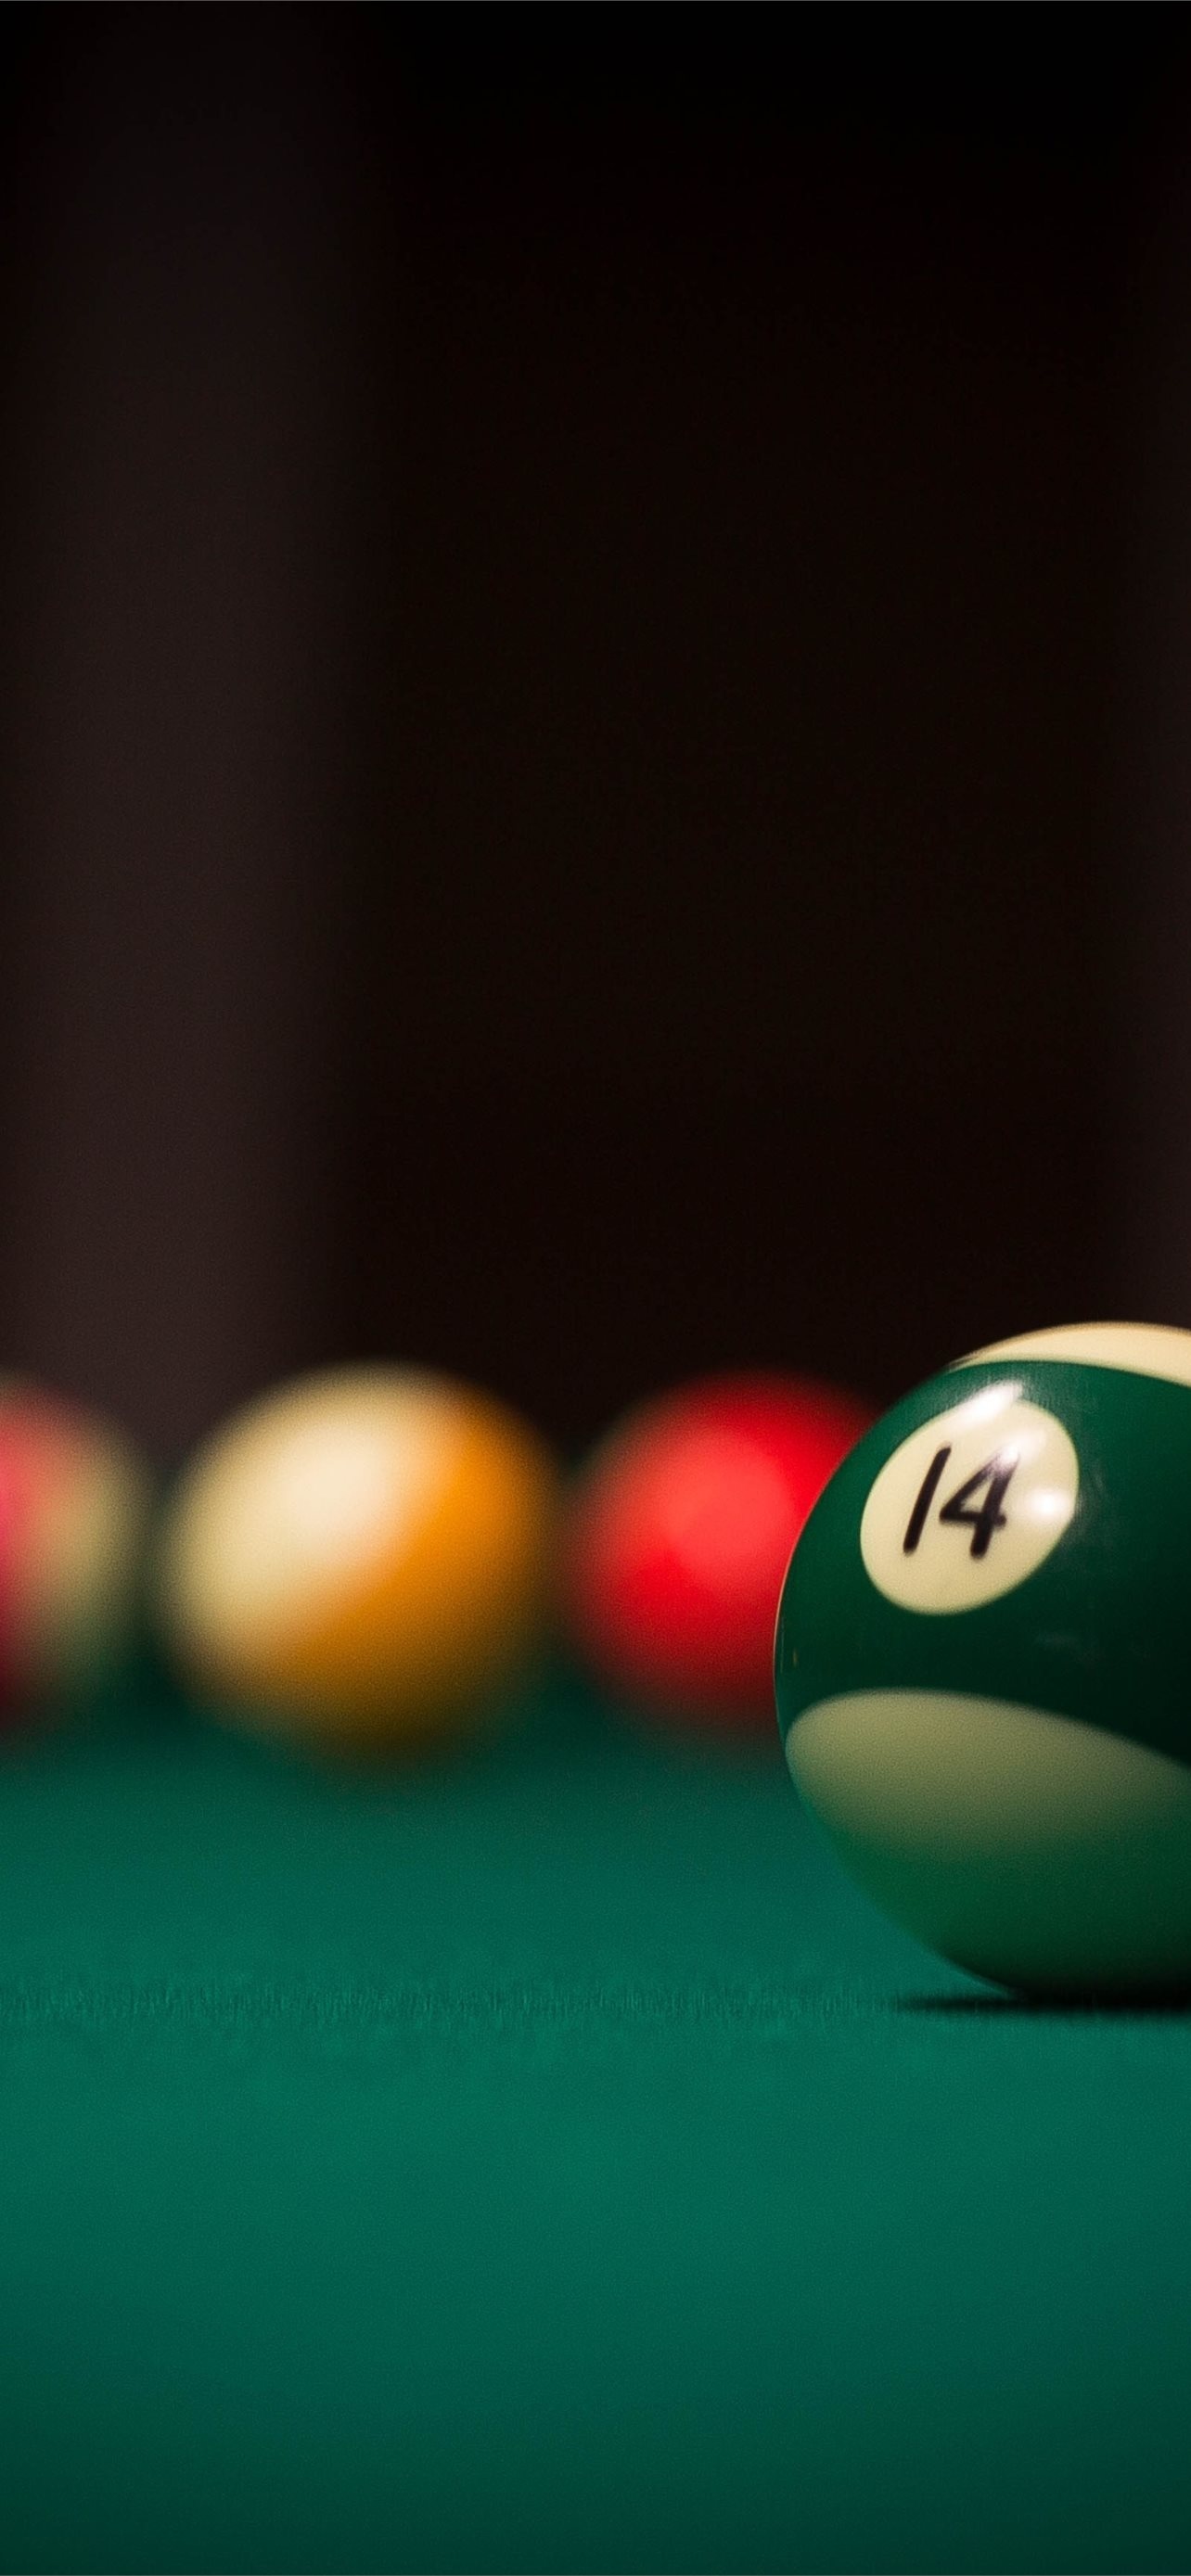 Billiards: Billiard room, An object ball that is used in a classic American eight-ball style of cue sports. 1290x2780 HD Wallpaper.